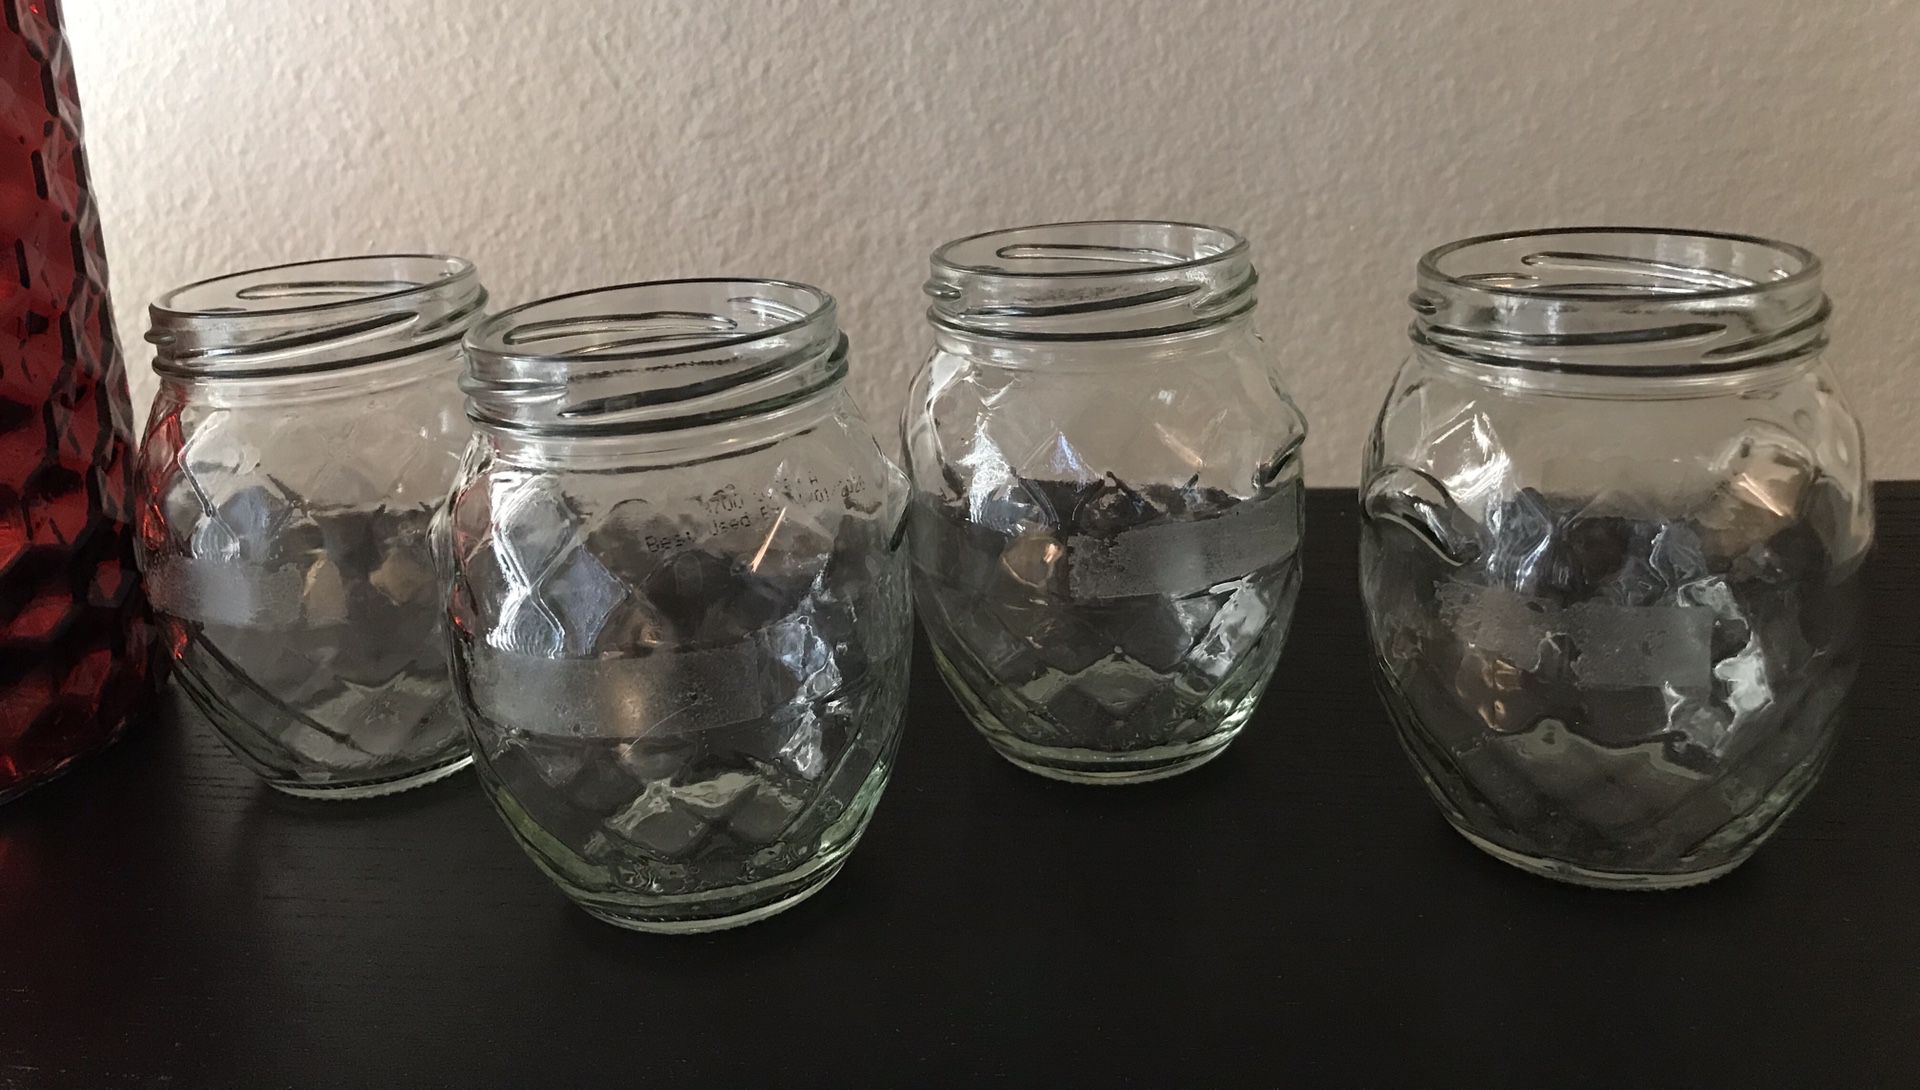 4 Small Jar or Candle Holder Set $1